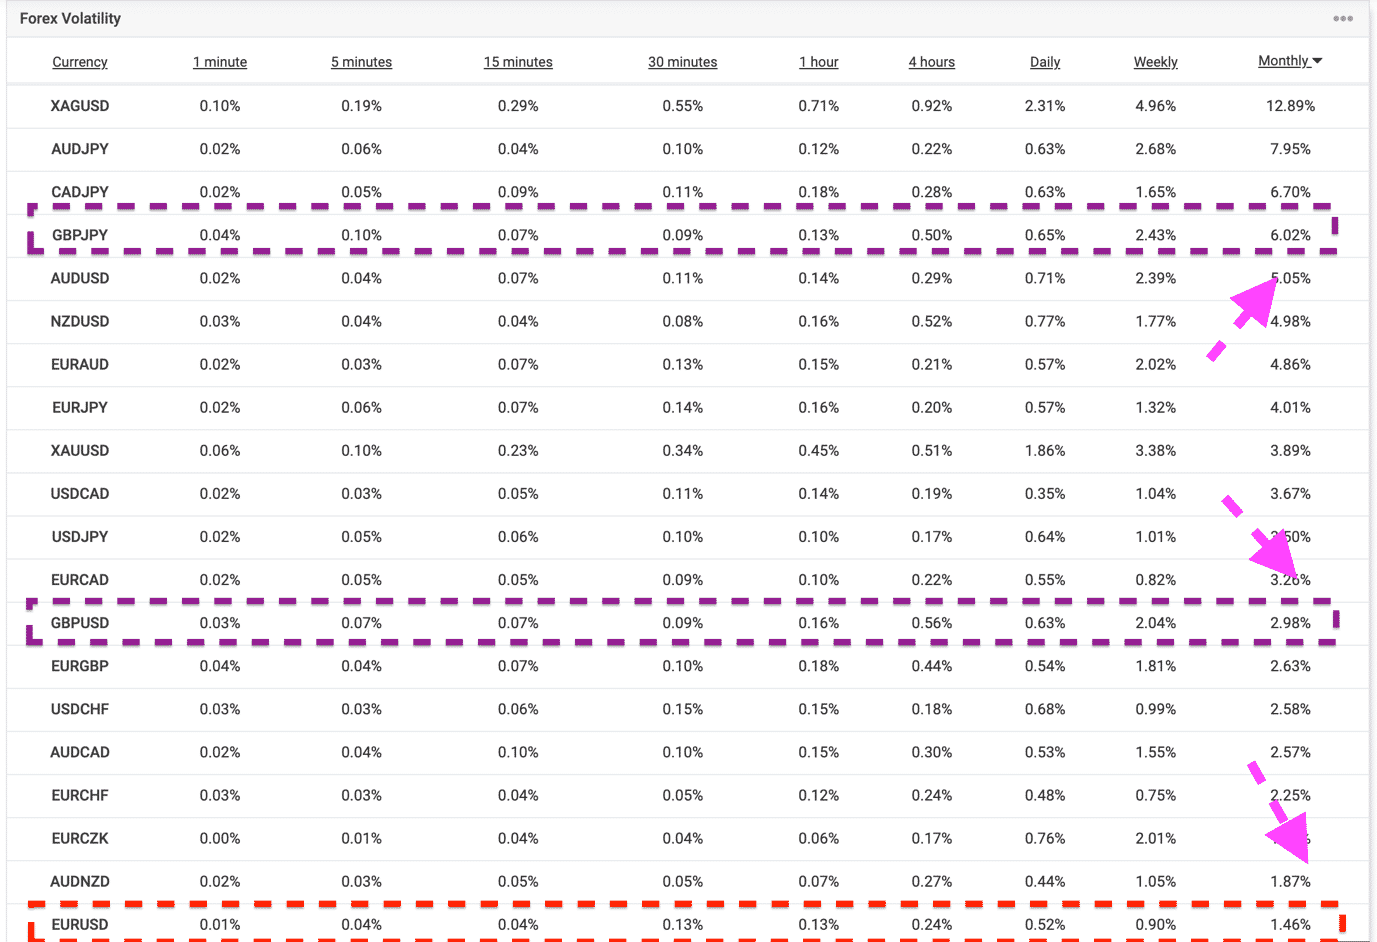 Myfxbook volatility comparisons for numerous currency pairs